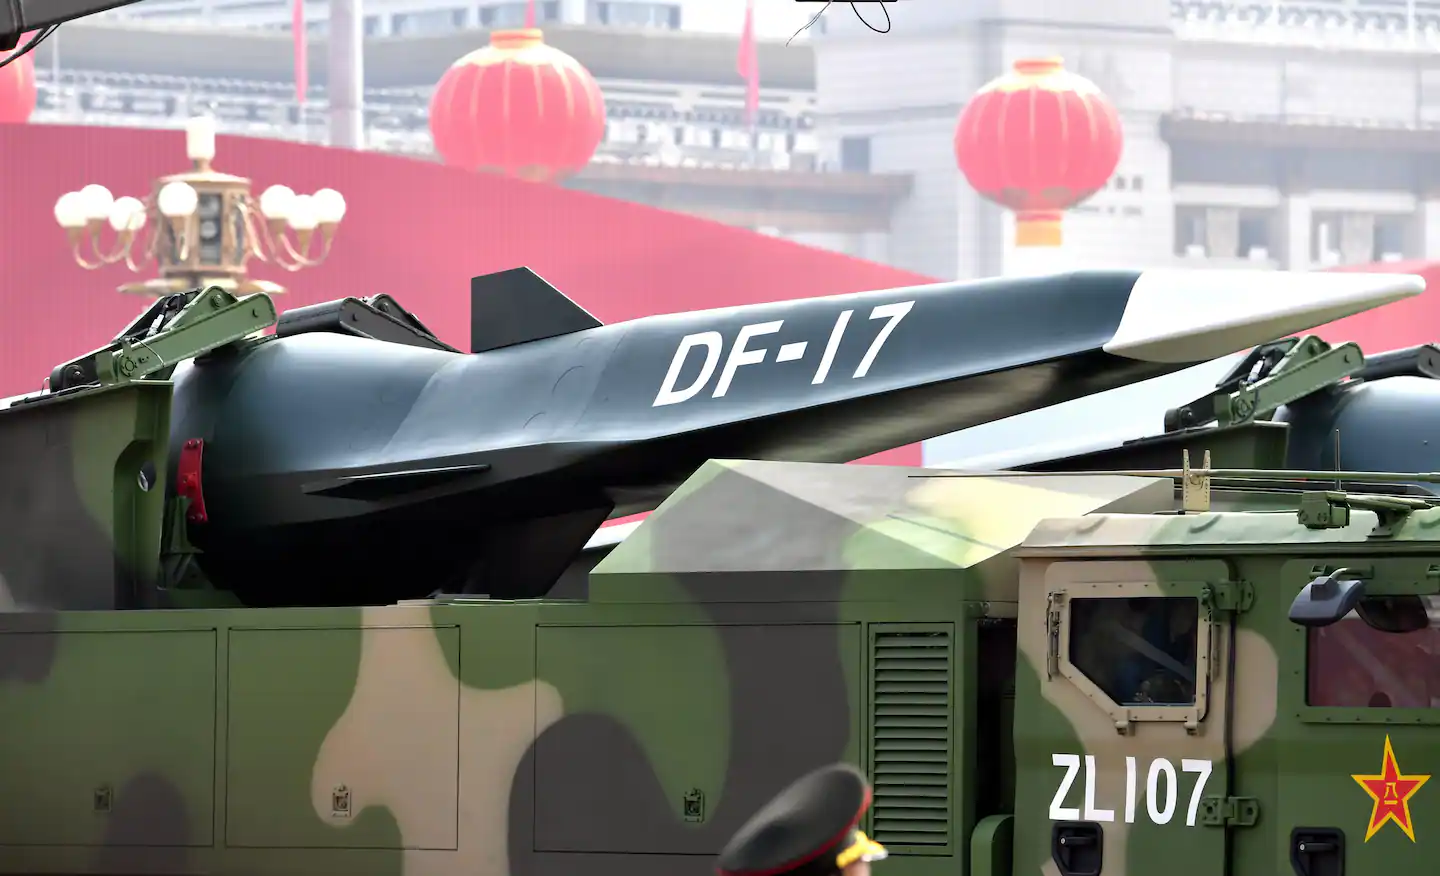 China builds advanced weapons systems using American technology